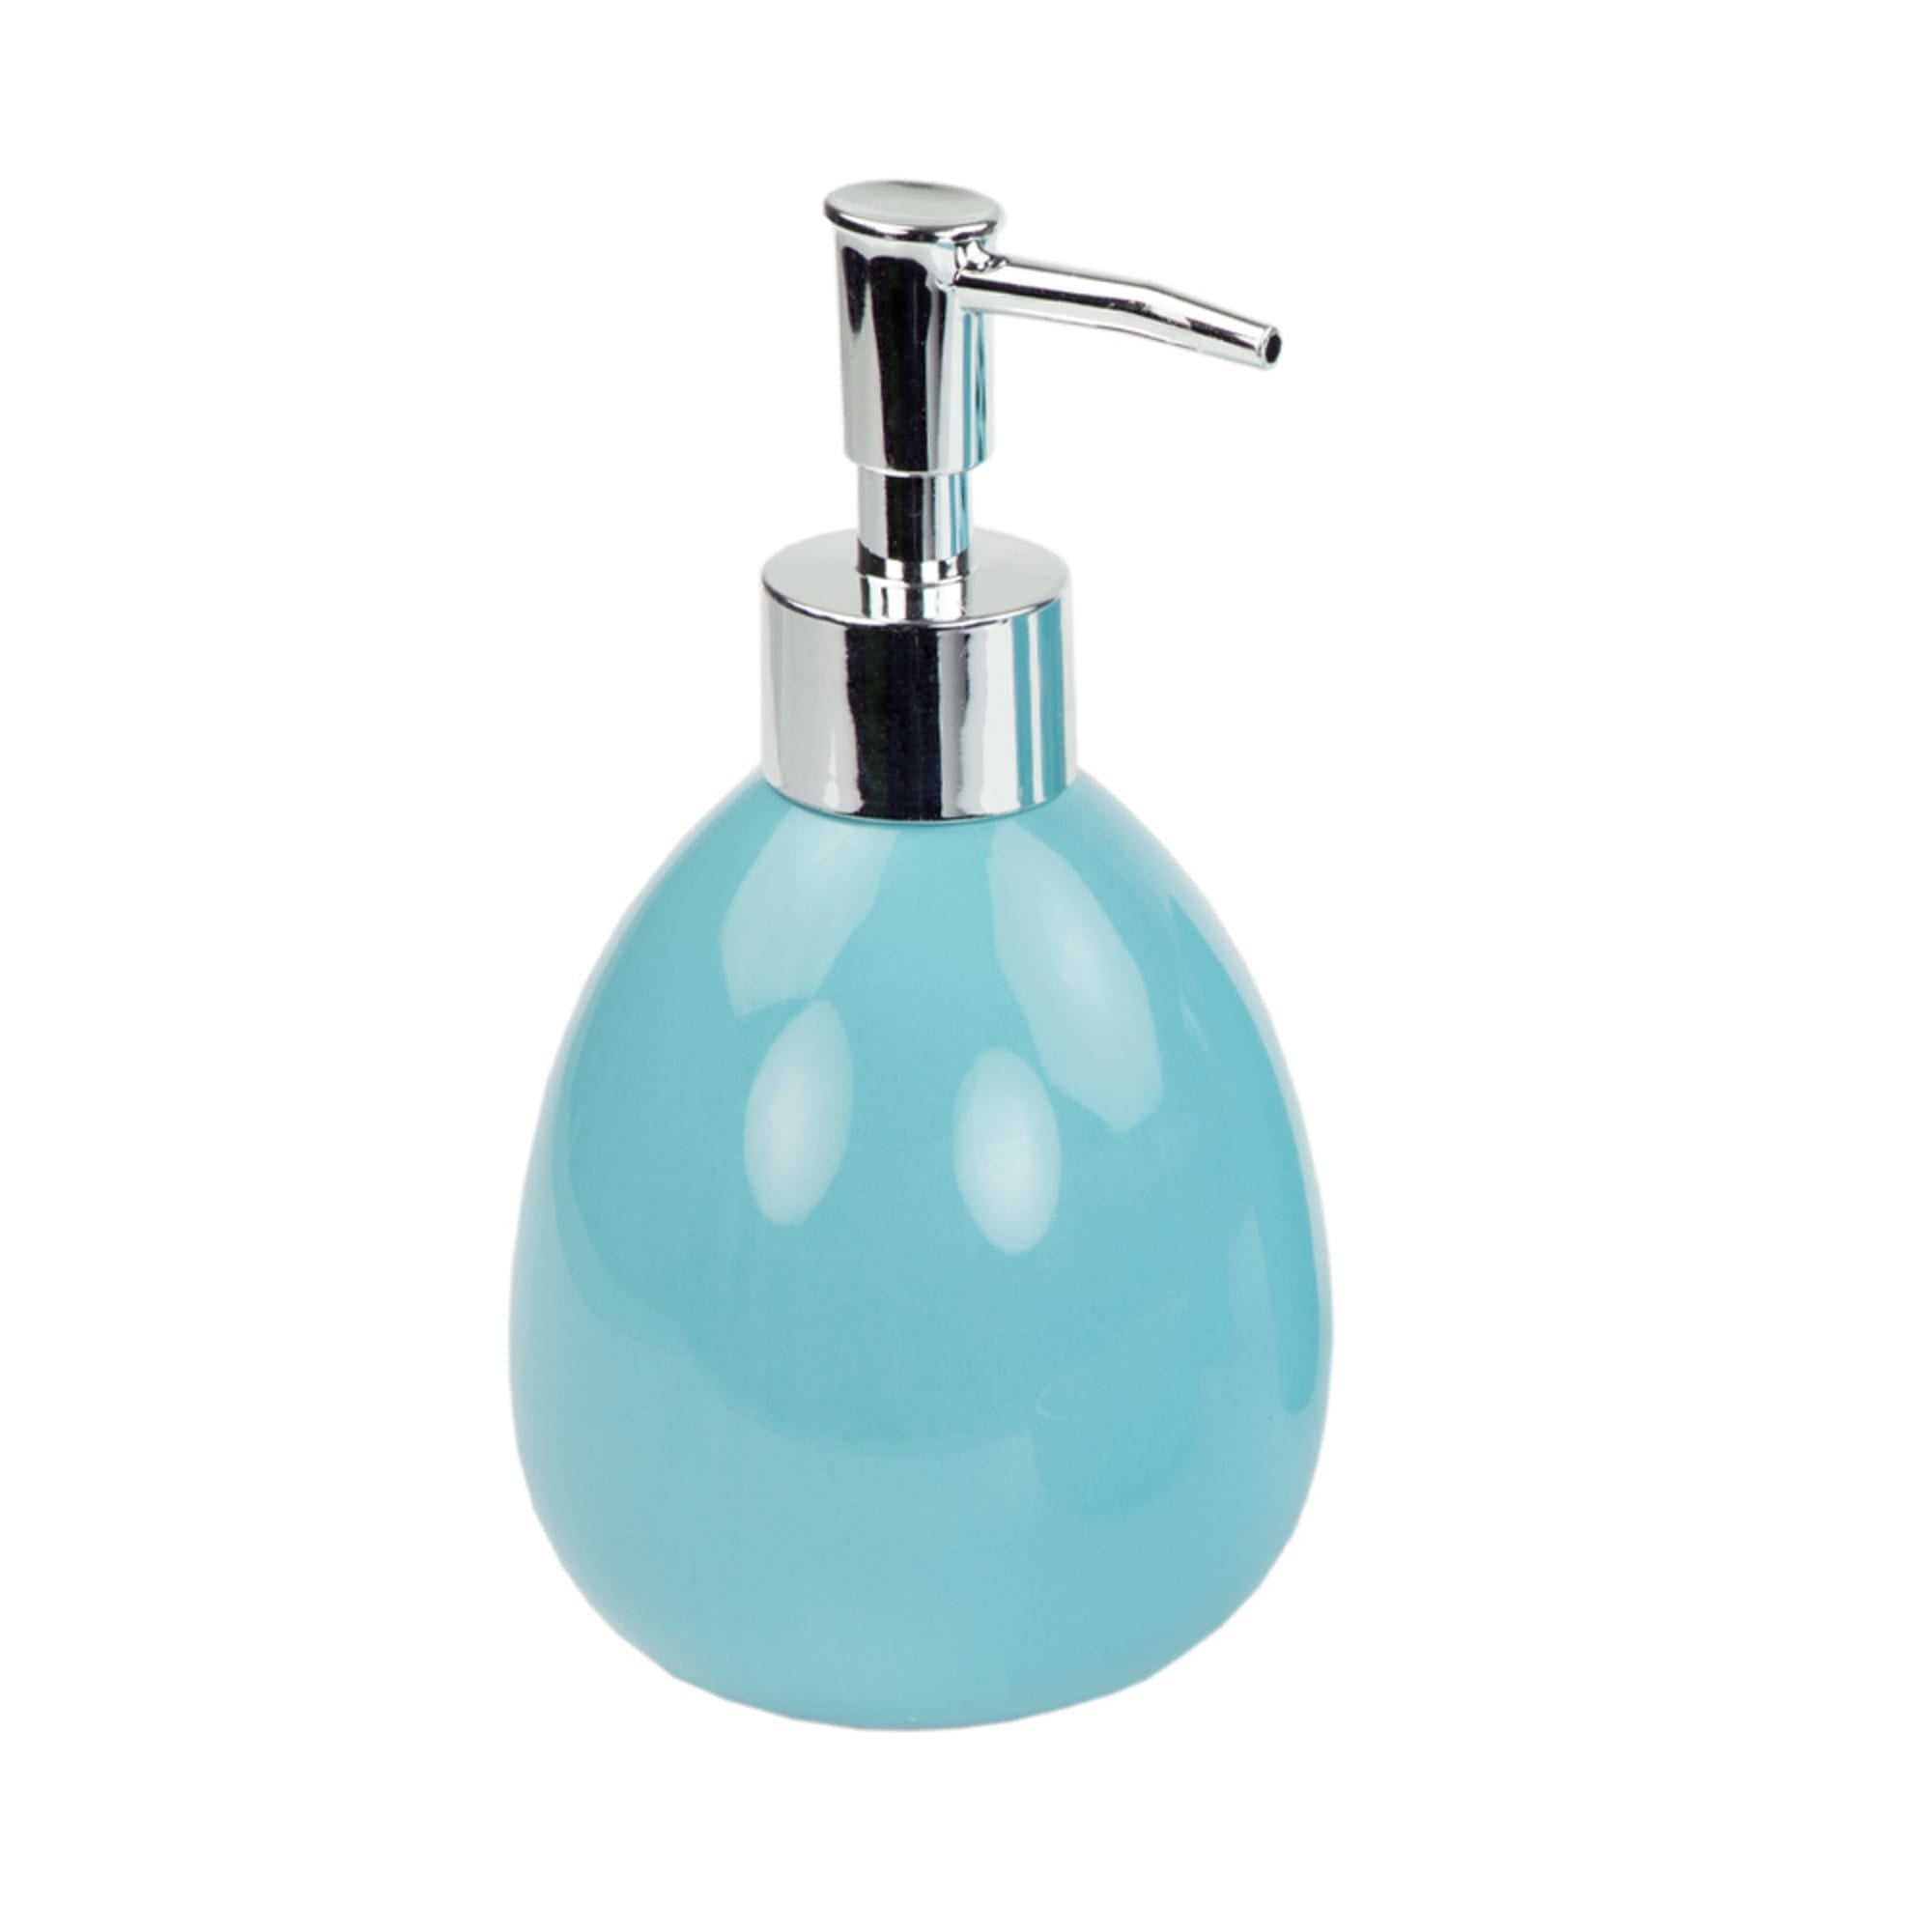 Home Basics 4 Piece Bath Accessory Set, Turquoise $10.00 EACH, CASE PACK OF 12